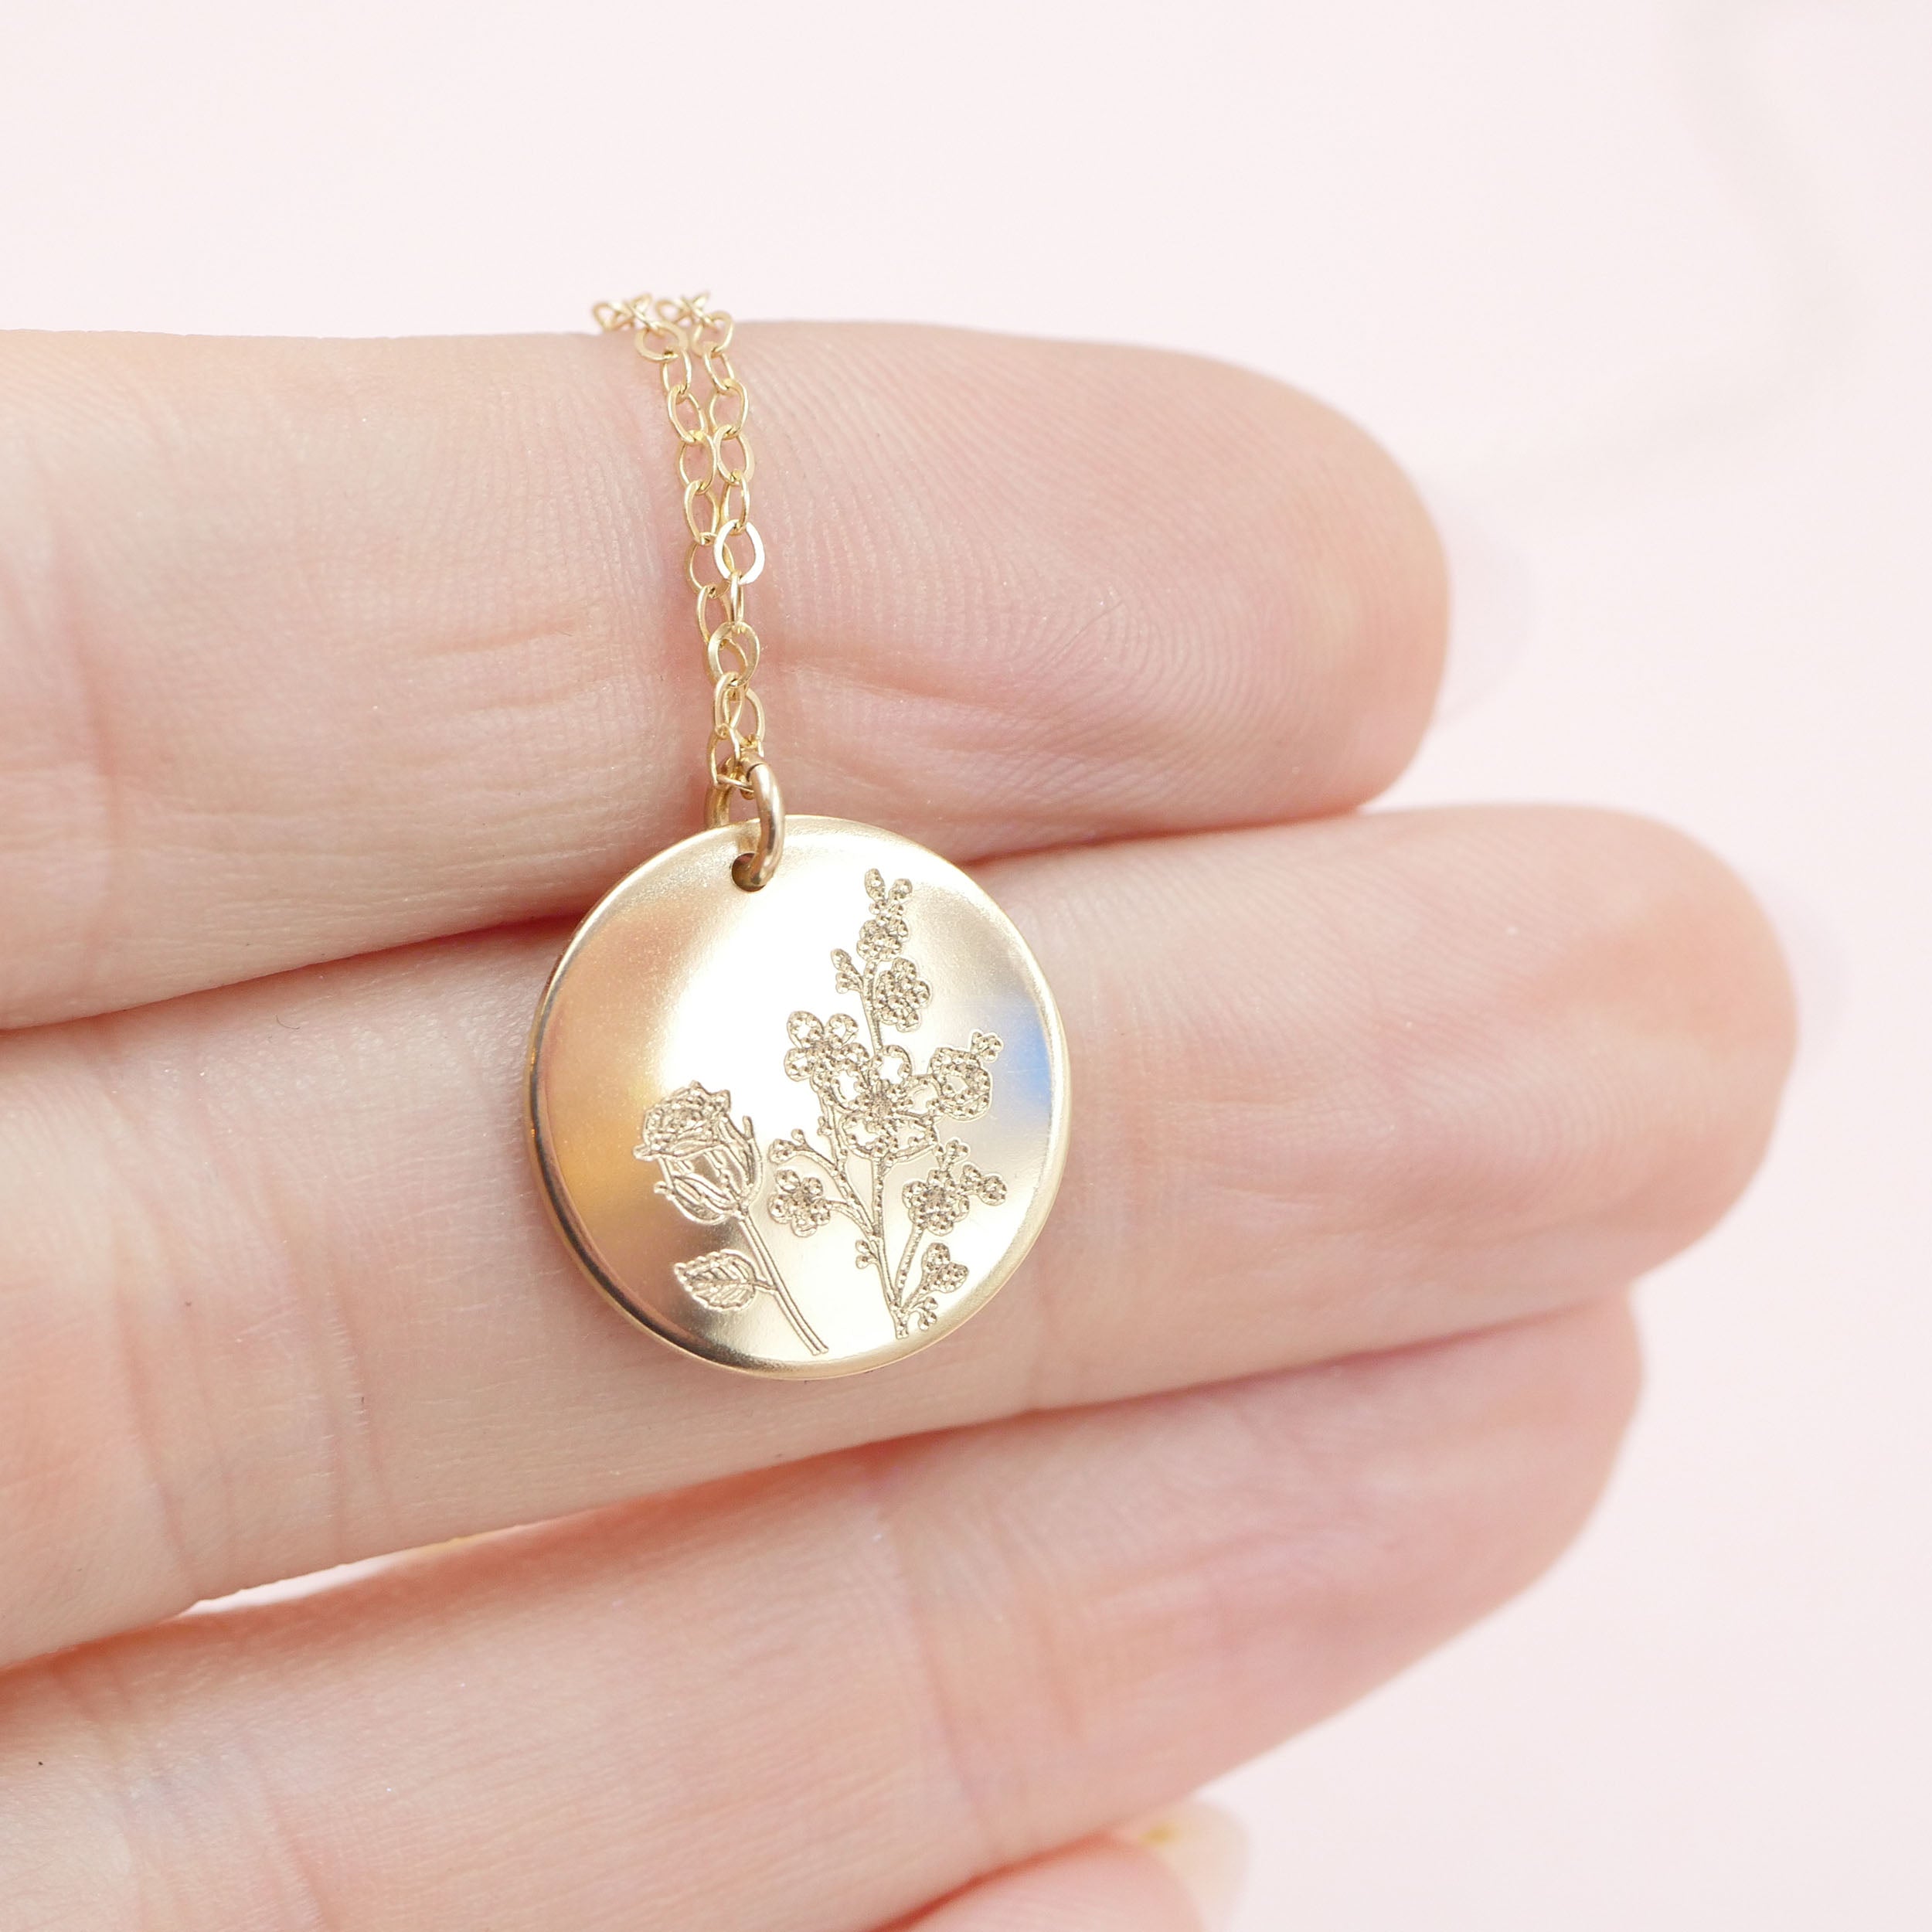 Birth Flower Necklace | Simple & Dainty